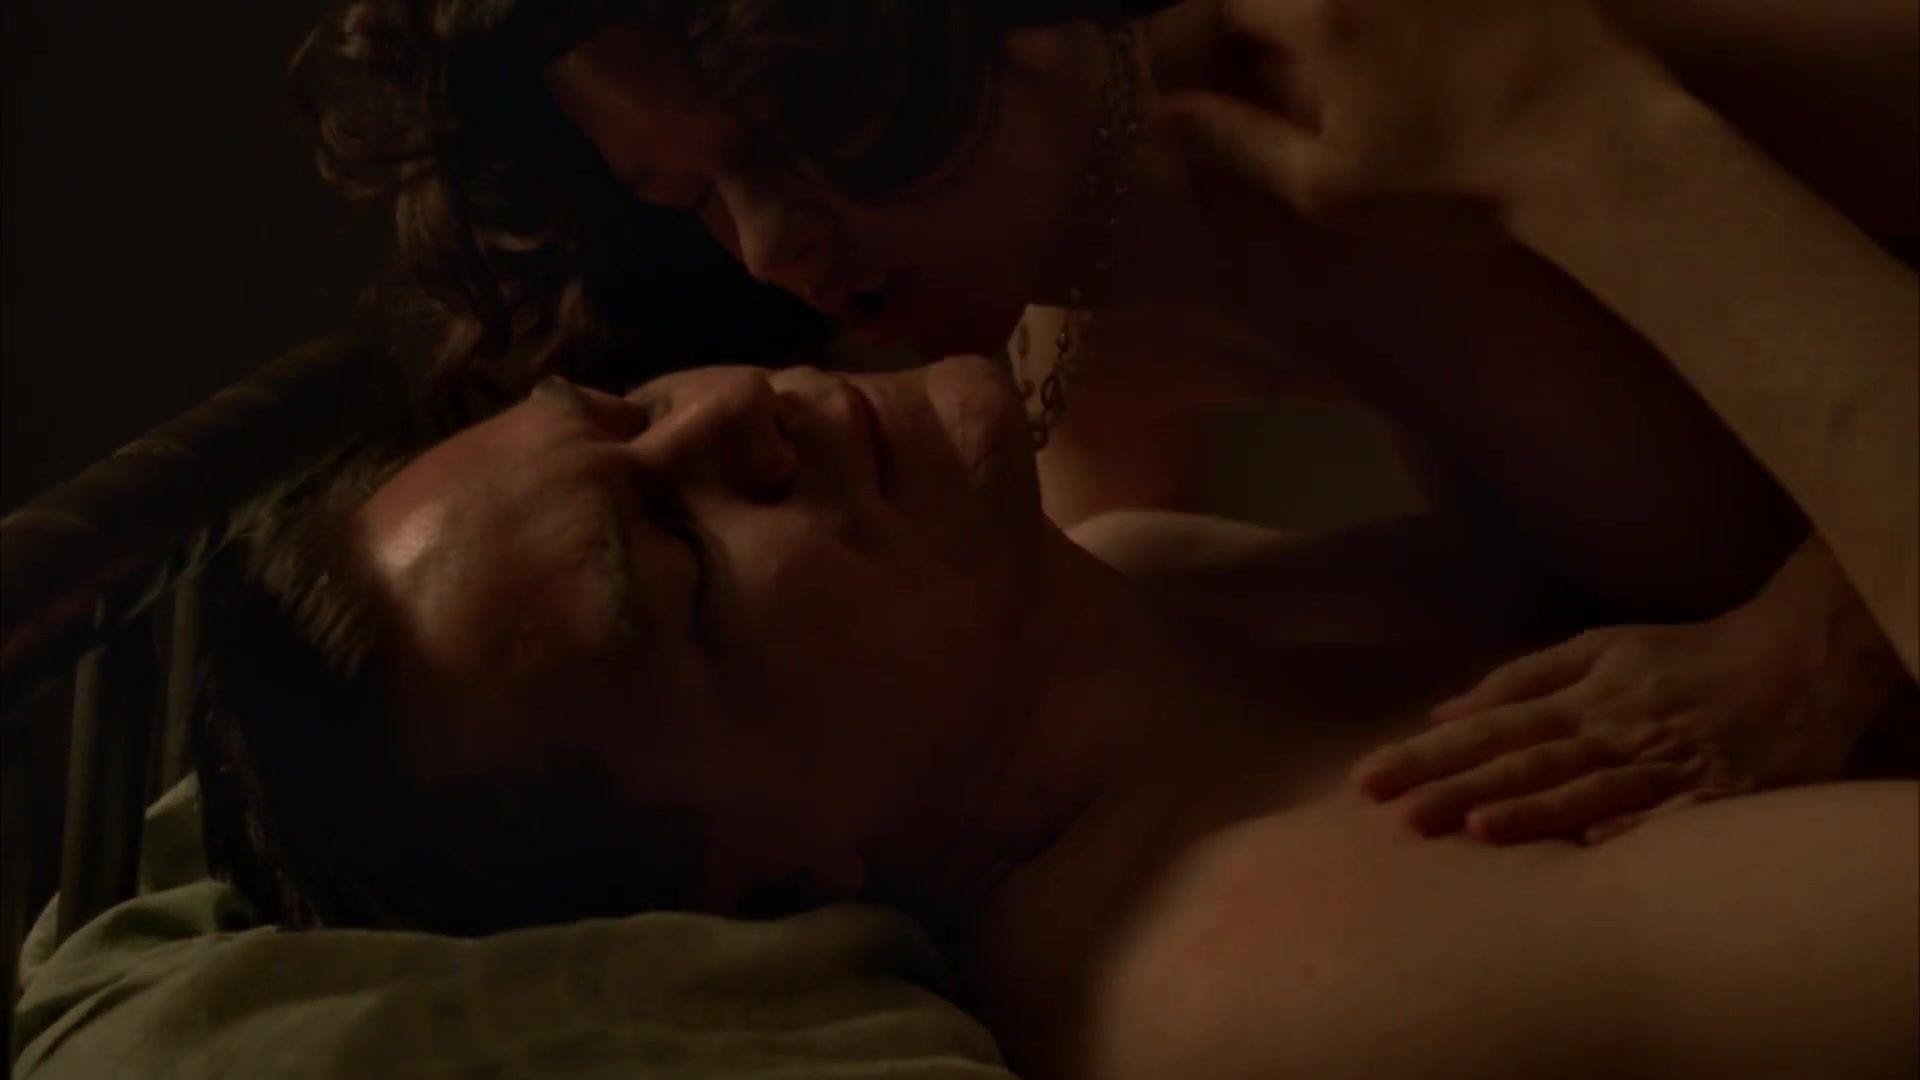 Classroom Man takes hot housewife and scores her cunt cumming right inside in Boardwalk Empire No Condom - 1